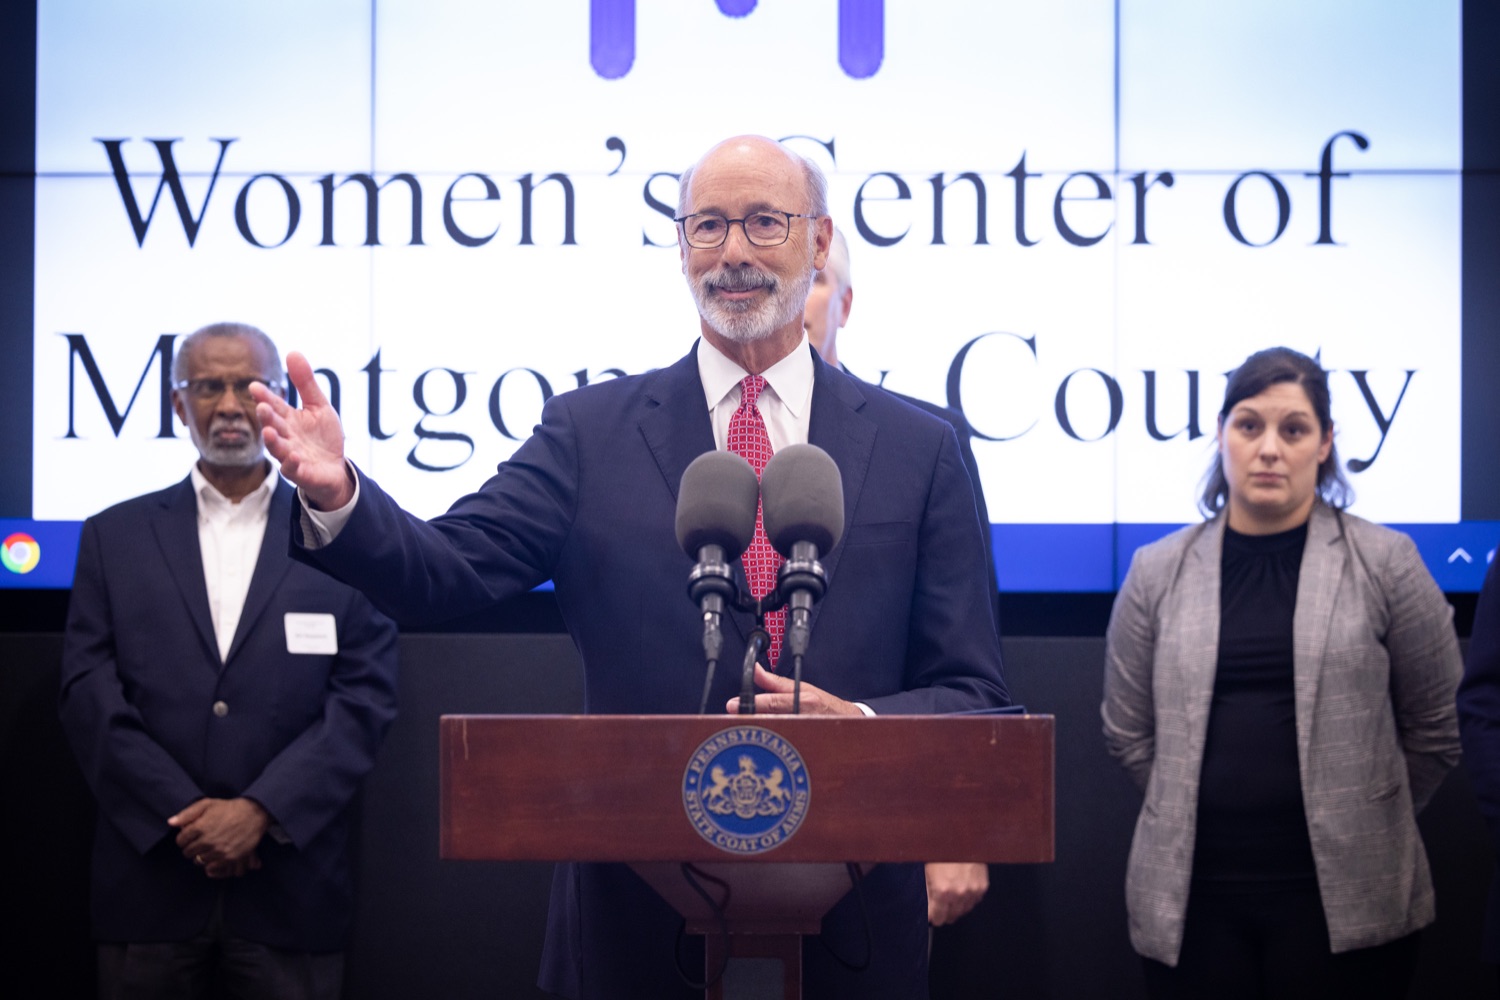 Governor Tom Wolf speaks to the press.  Governor Tom Wolf discussed the devastating effects of abortion bans for victims of domestic violence and the recently signed executive order allowing out-of-state residents to seek reproductive health care services in Pennsylvania without fear of prosecution.  JULY 29, 2022 - COLMAR, PA<br><a href="https://filesource.amperwave.net/commonwealthofpa/photo/22054_gov_choice_dz_001.JPG" target="_blank">⇣ Download Photo</a>